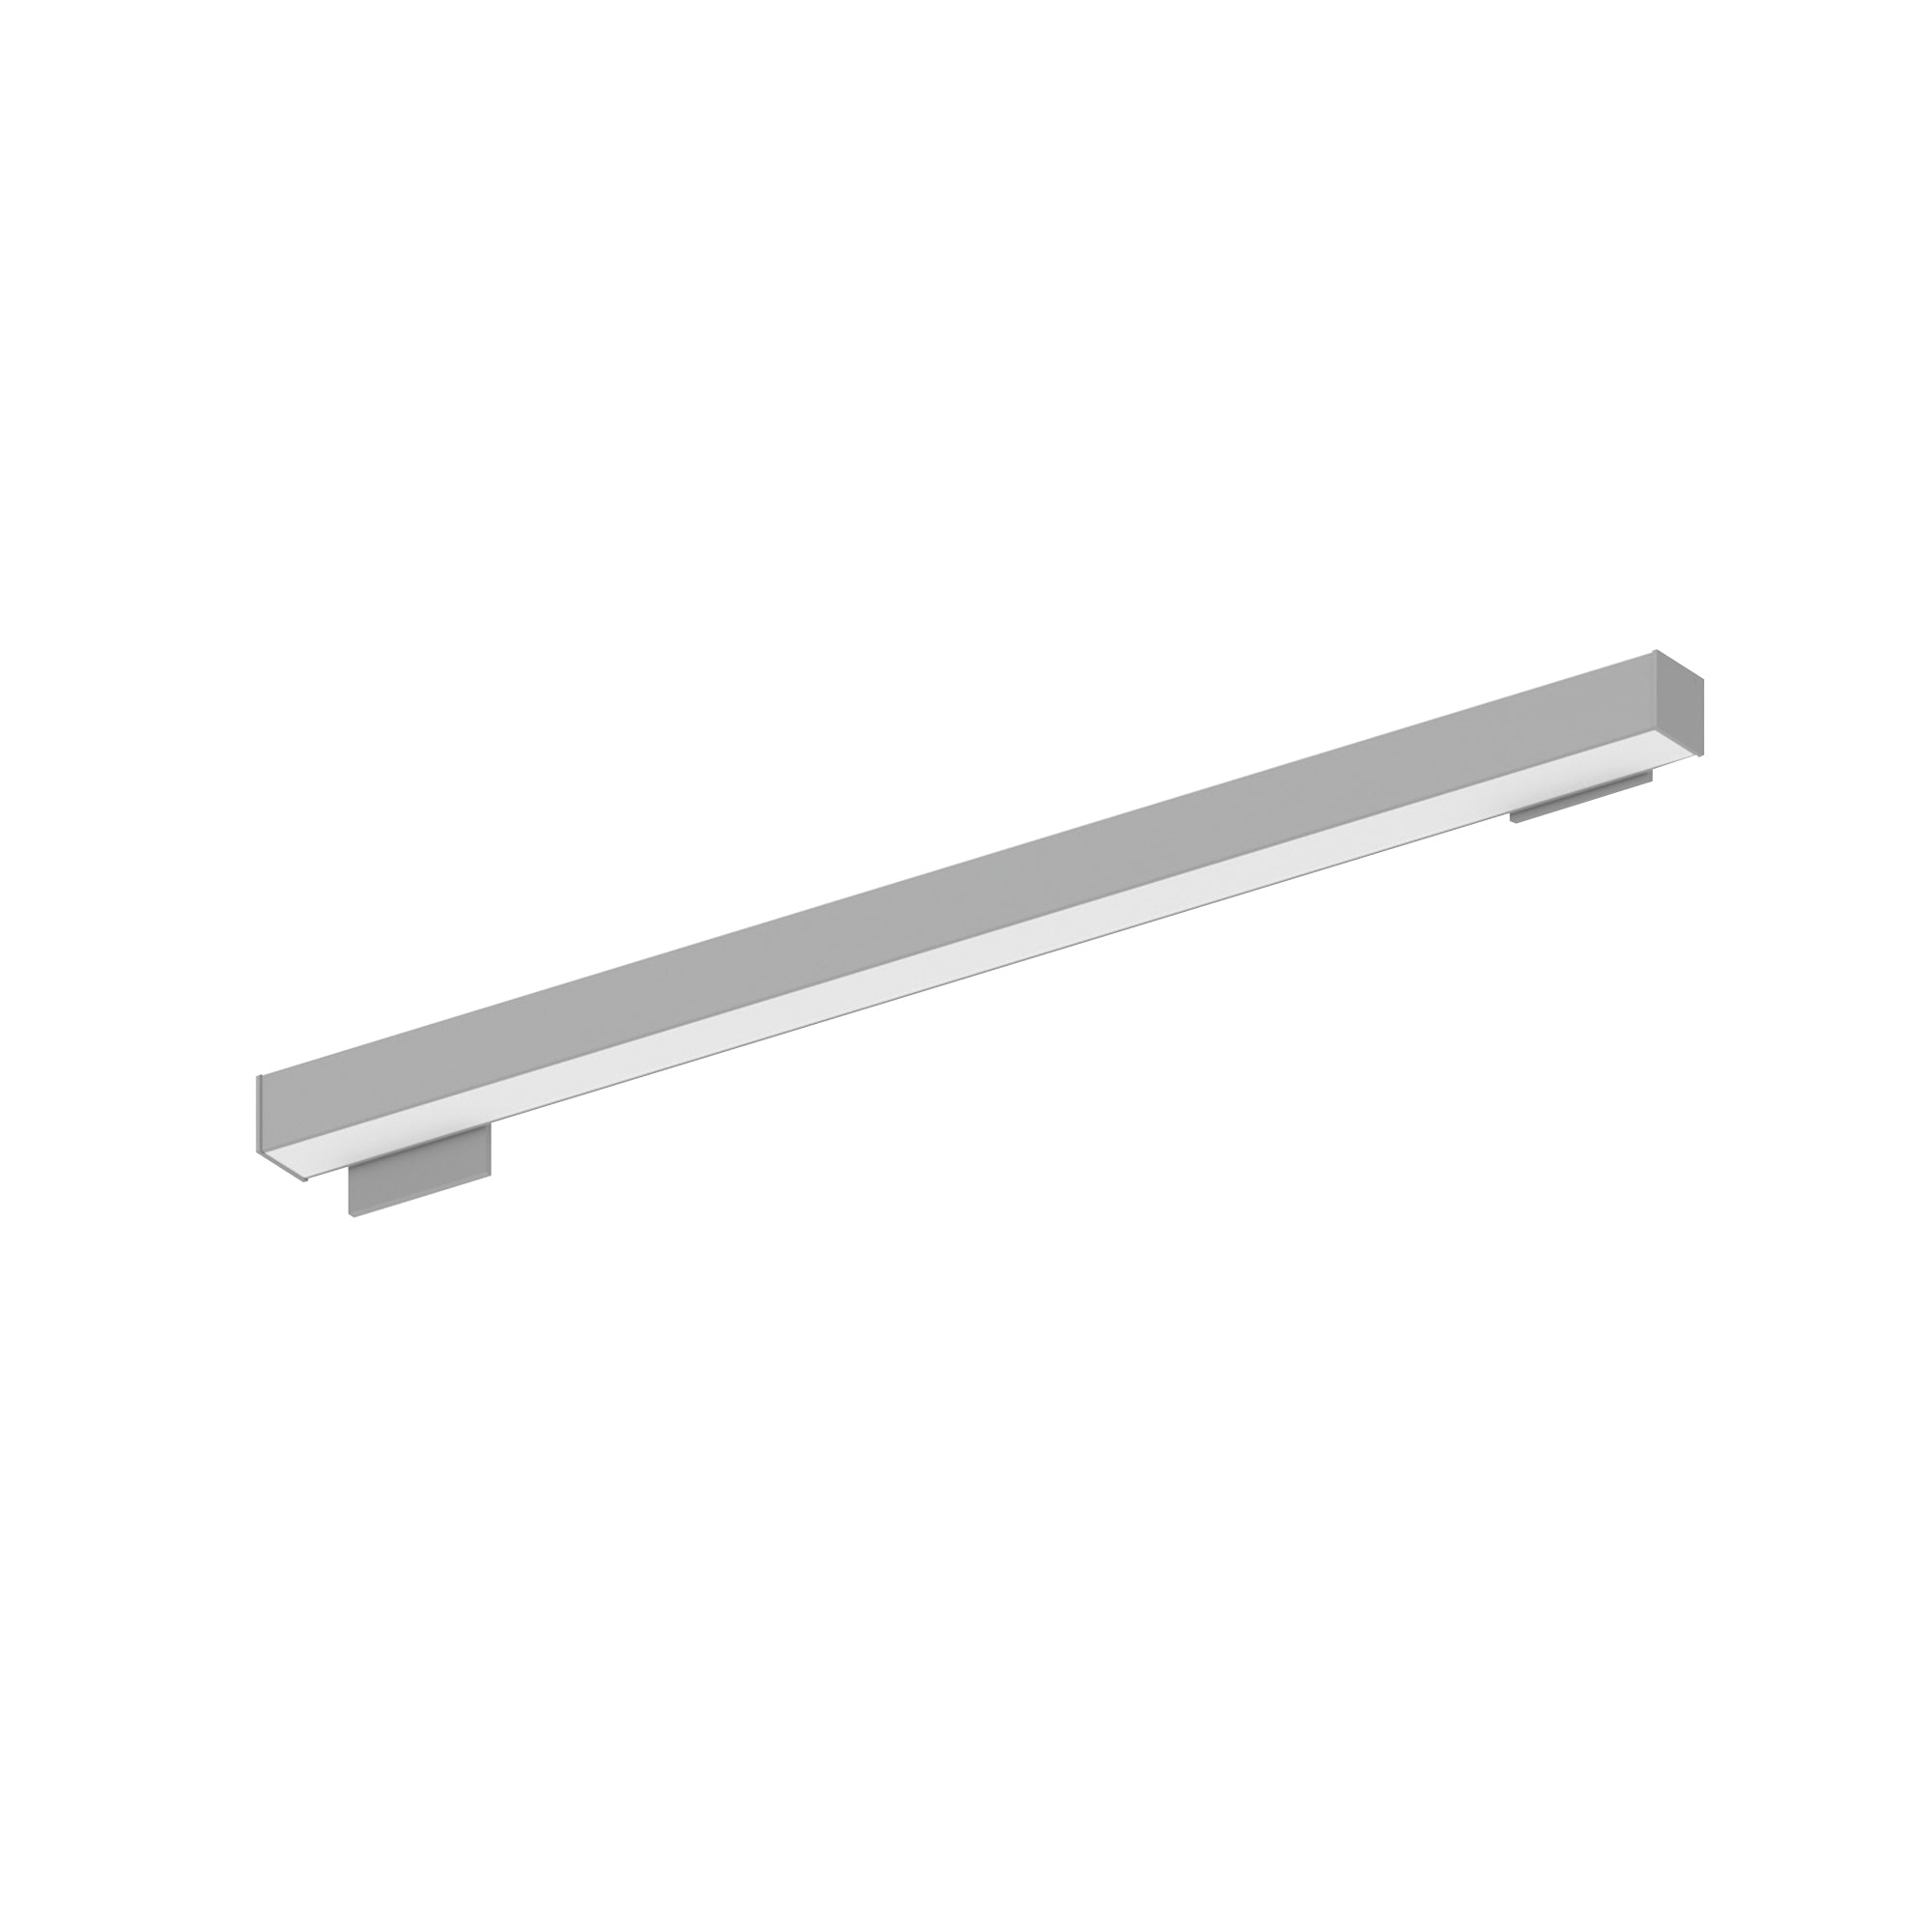 Nora Lighting NWLIN-41035A/L4-R2 - Linear - 4' L-Line LED Wall Mount Linear, 4200lm / 3500K, 4 Inchx4 Inch Left Plate & 2 Inchx4 Inch Right Plate, Aluminum Finish